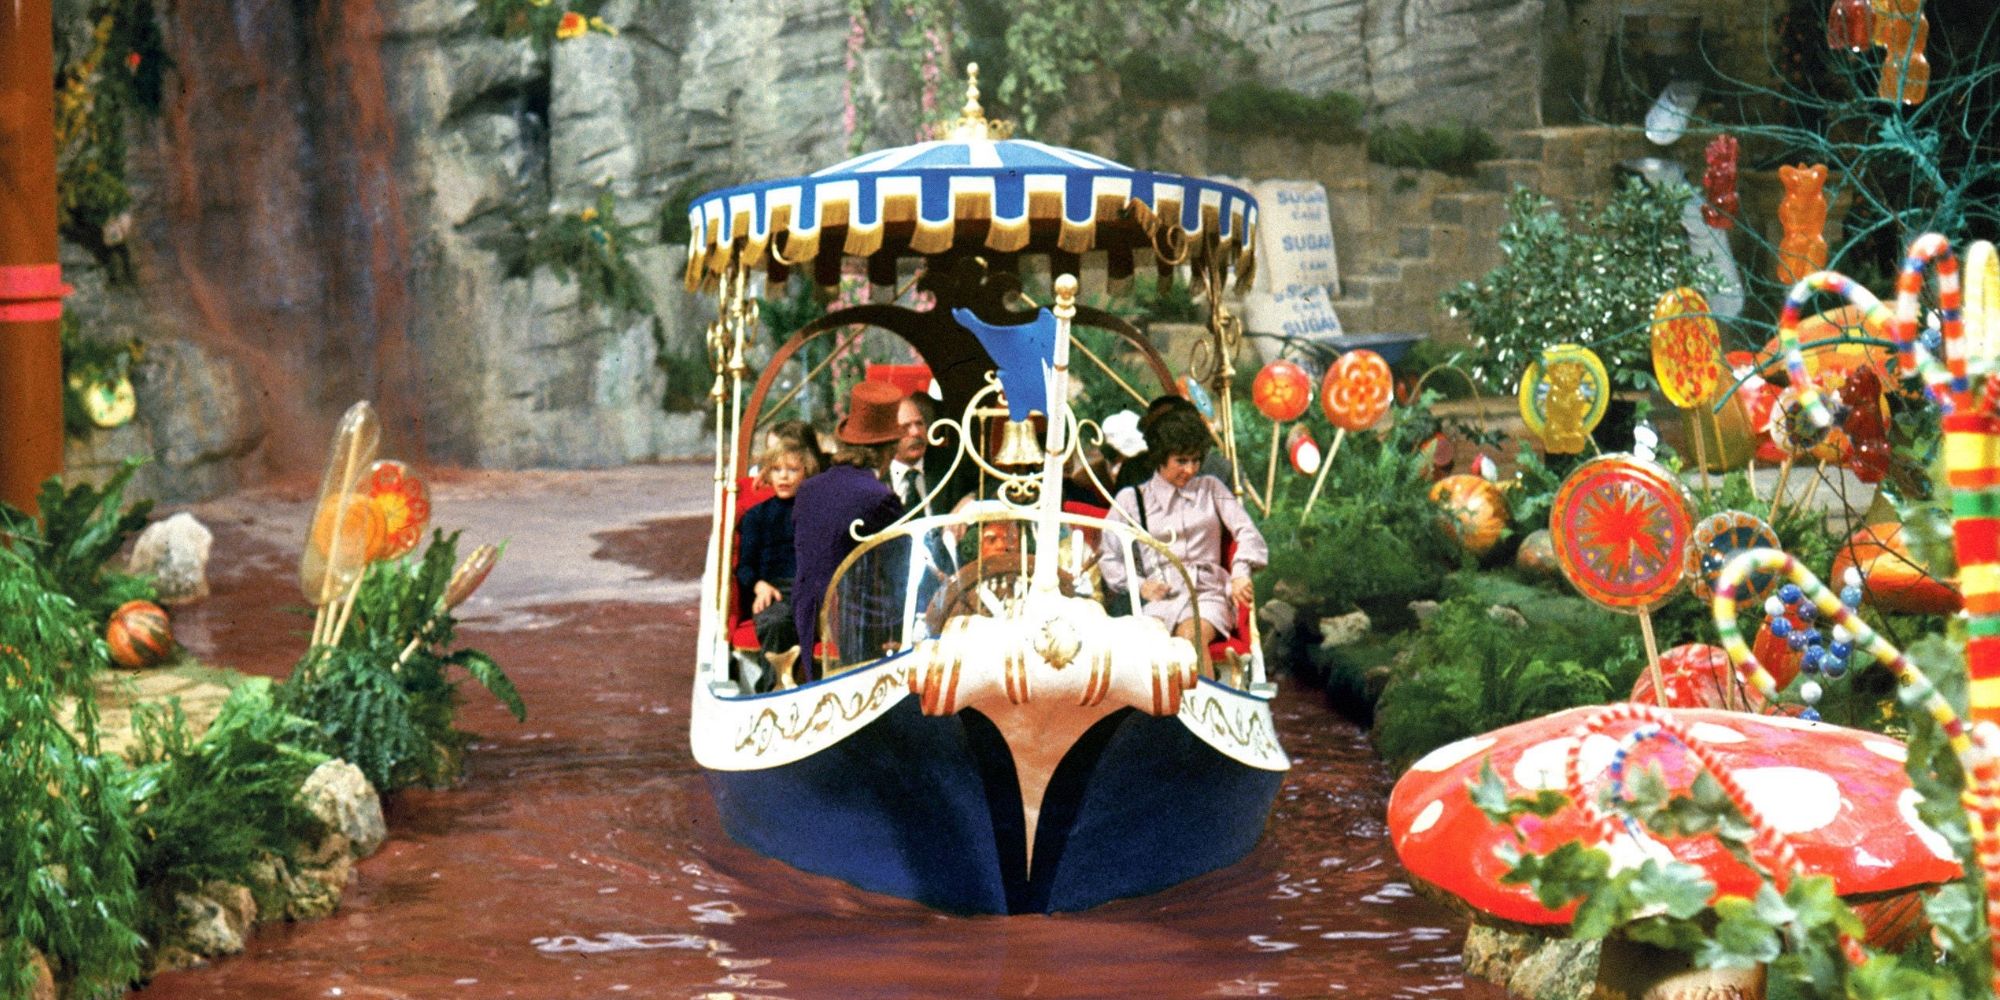 Wonka and the ticket winners ride a boat down a chocolate river